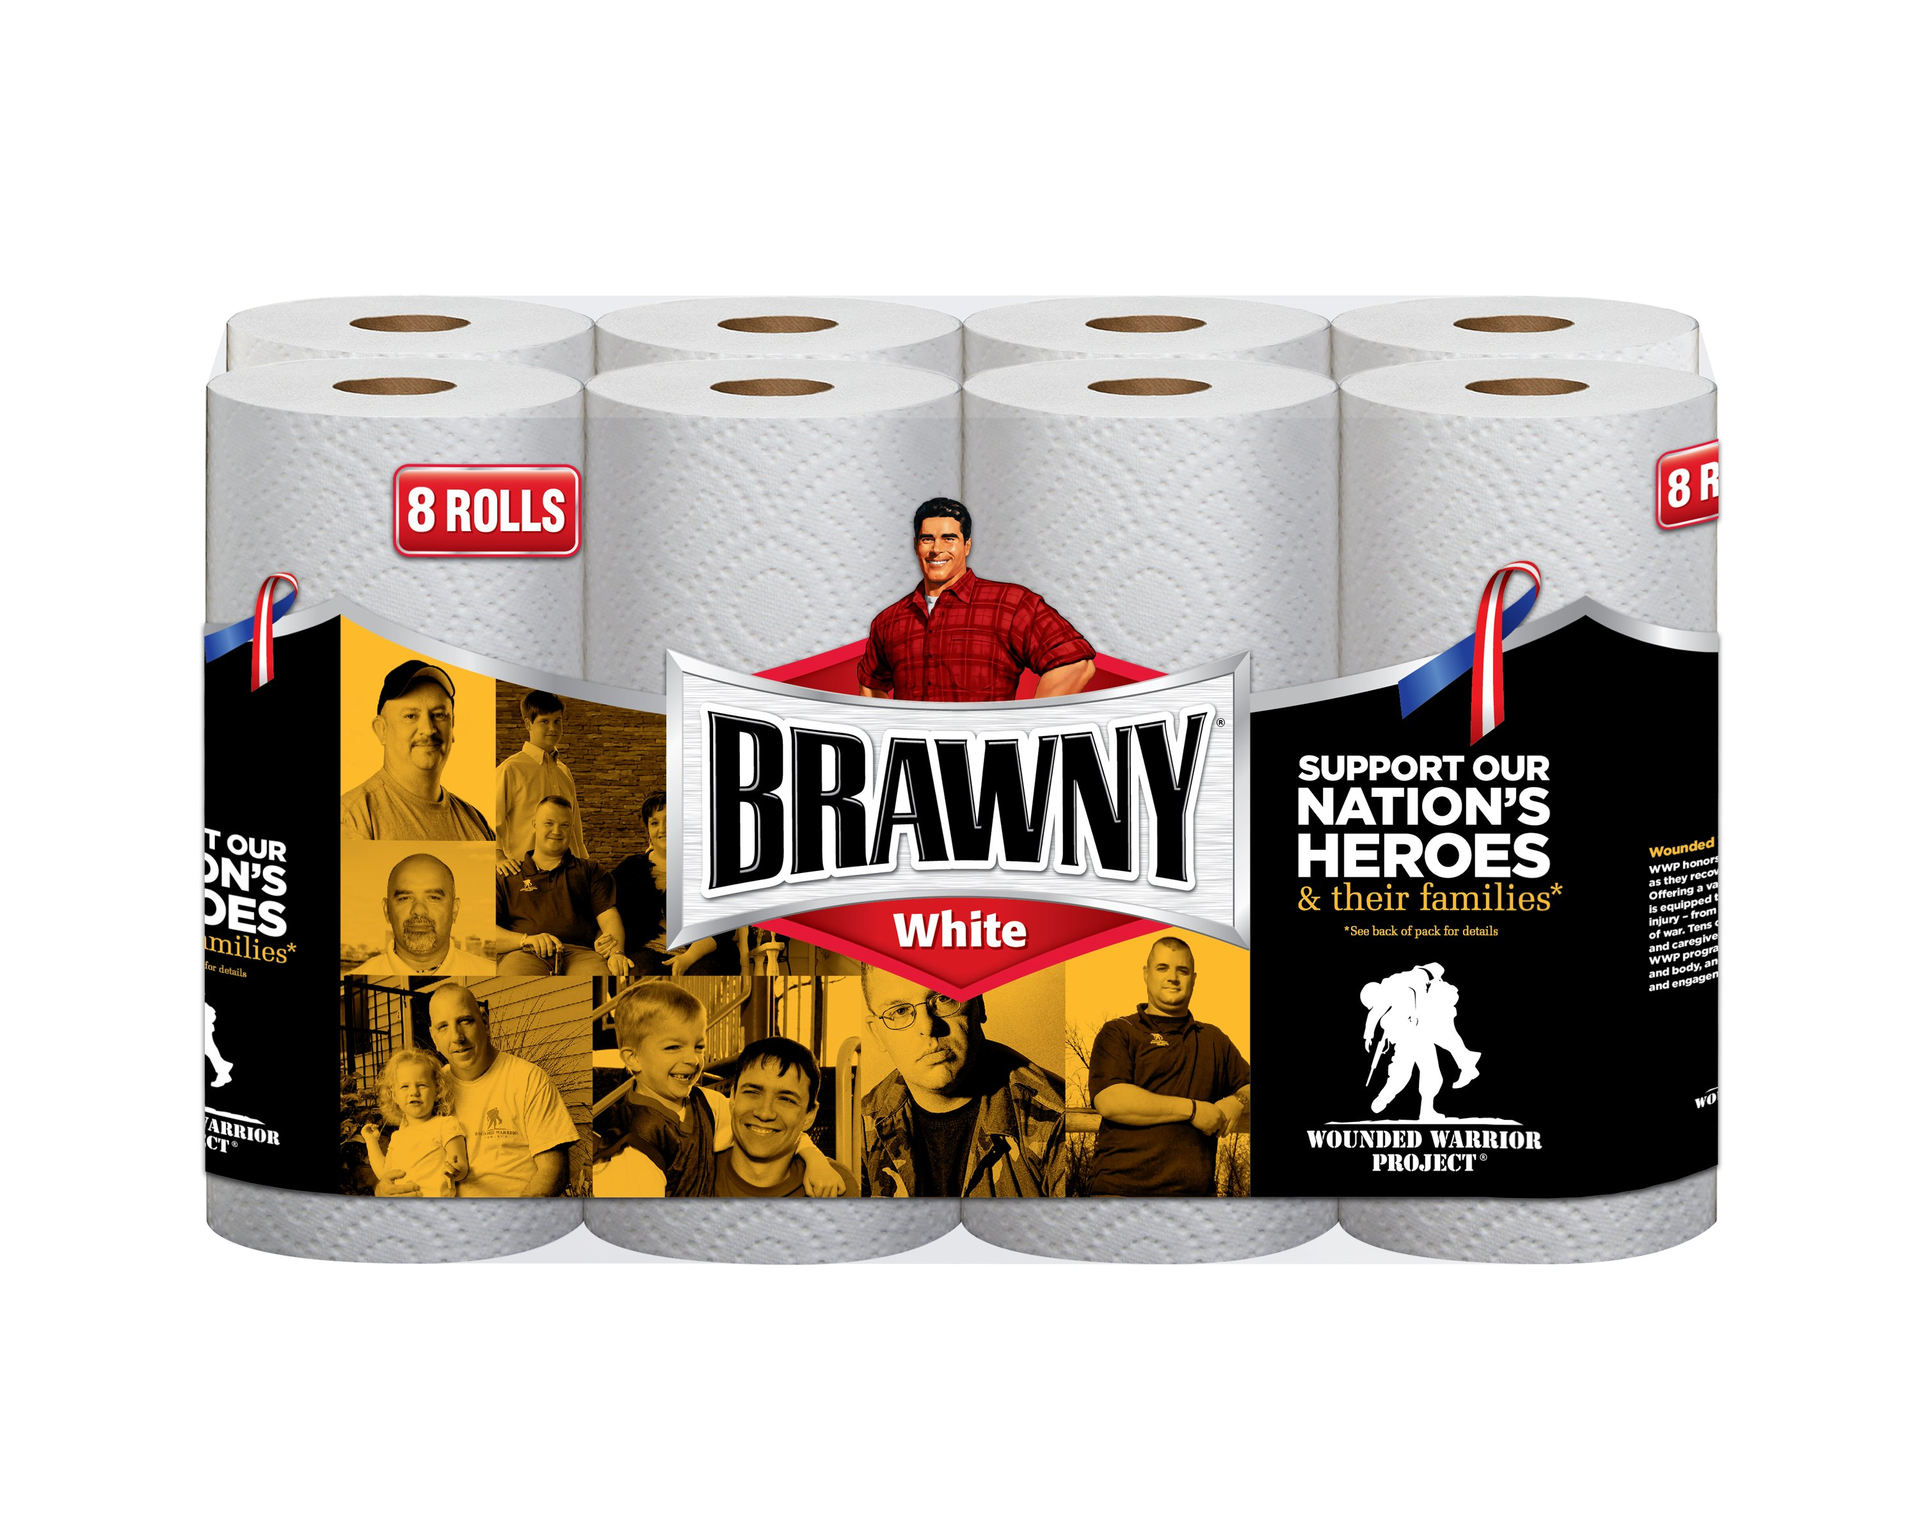 Brawny uses packaging to continue Wounded Warrior Project partnership |  Packaging World